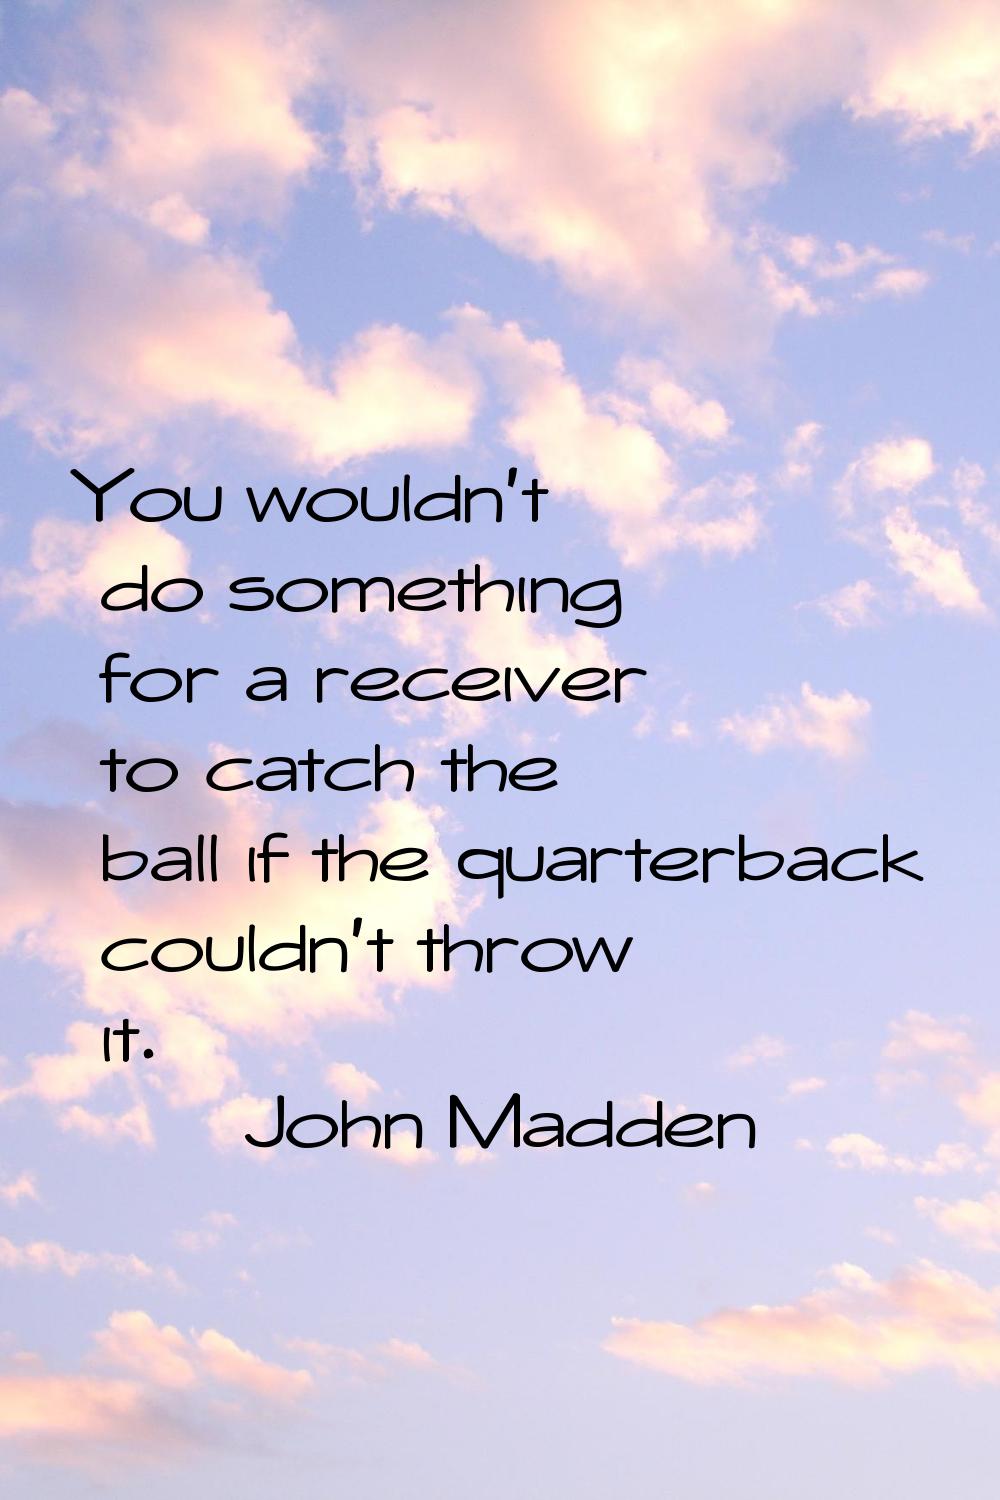 You wouldn't do something for a receiver to catch the ball if the quarterback couldn't throw it.